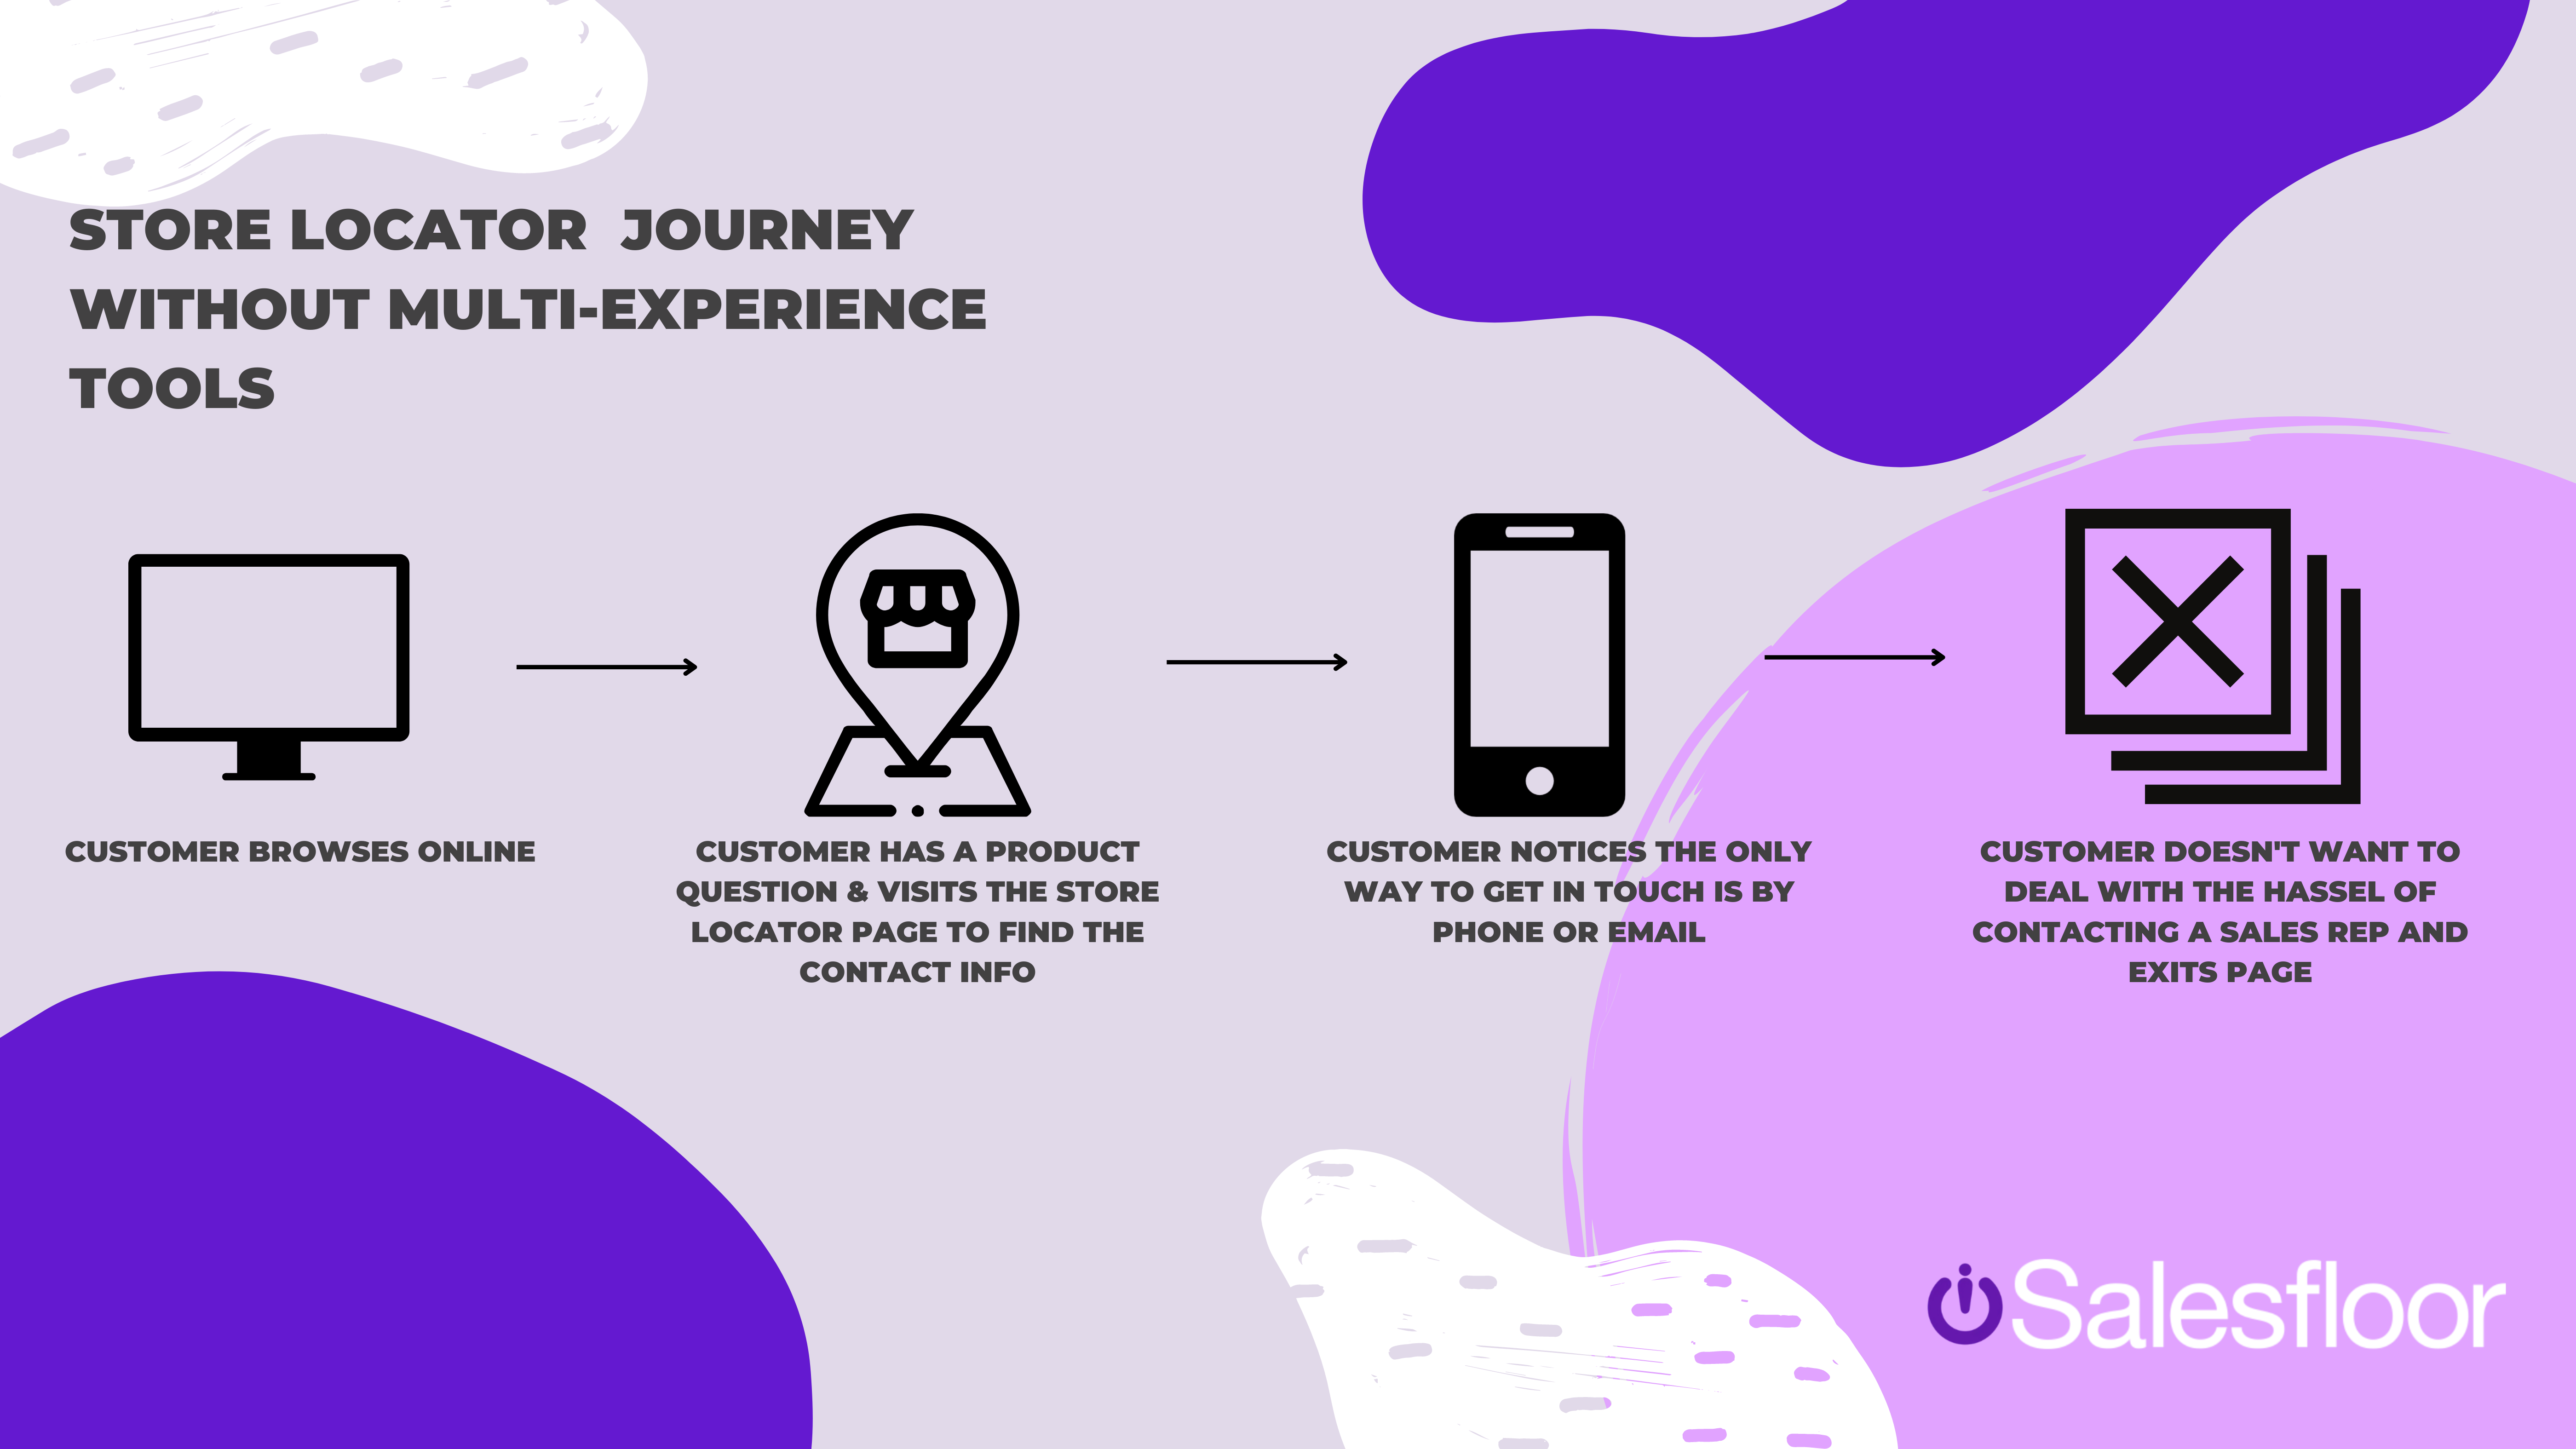 Copy of How to Turn Your Store Locator Into a Modern Multi-Experience Journey 